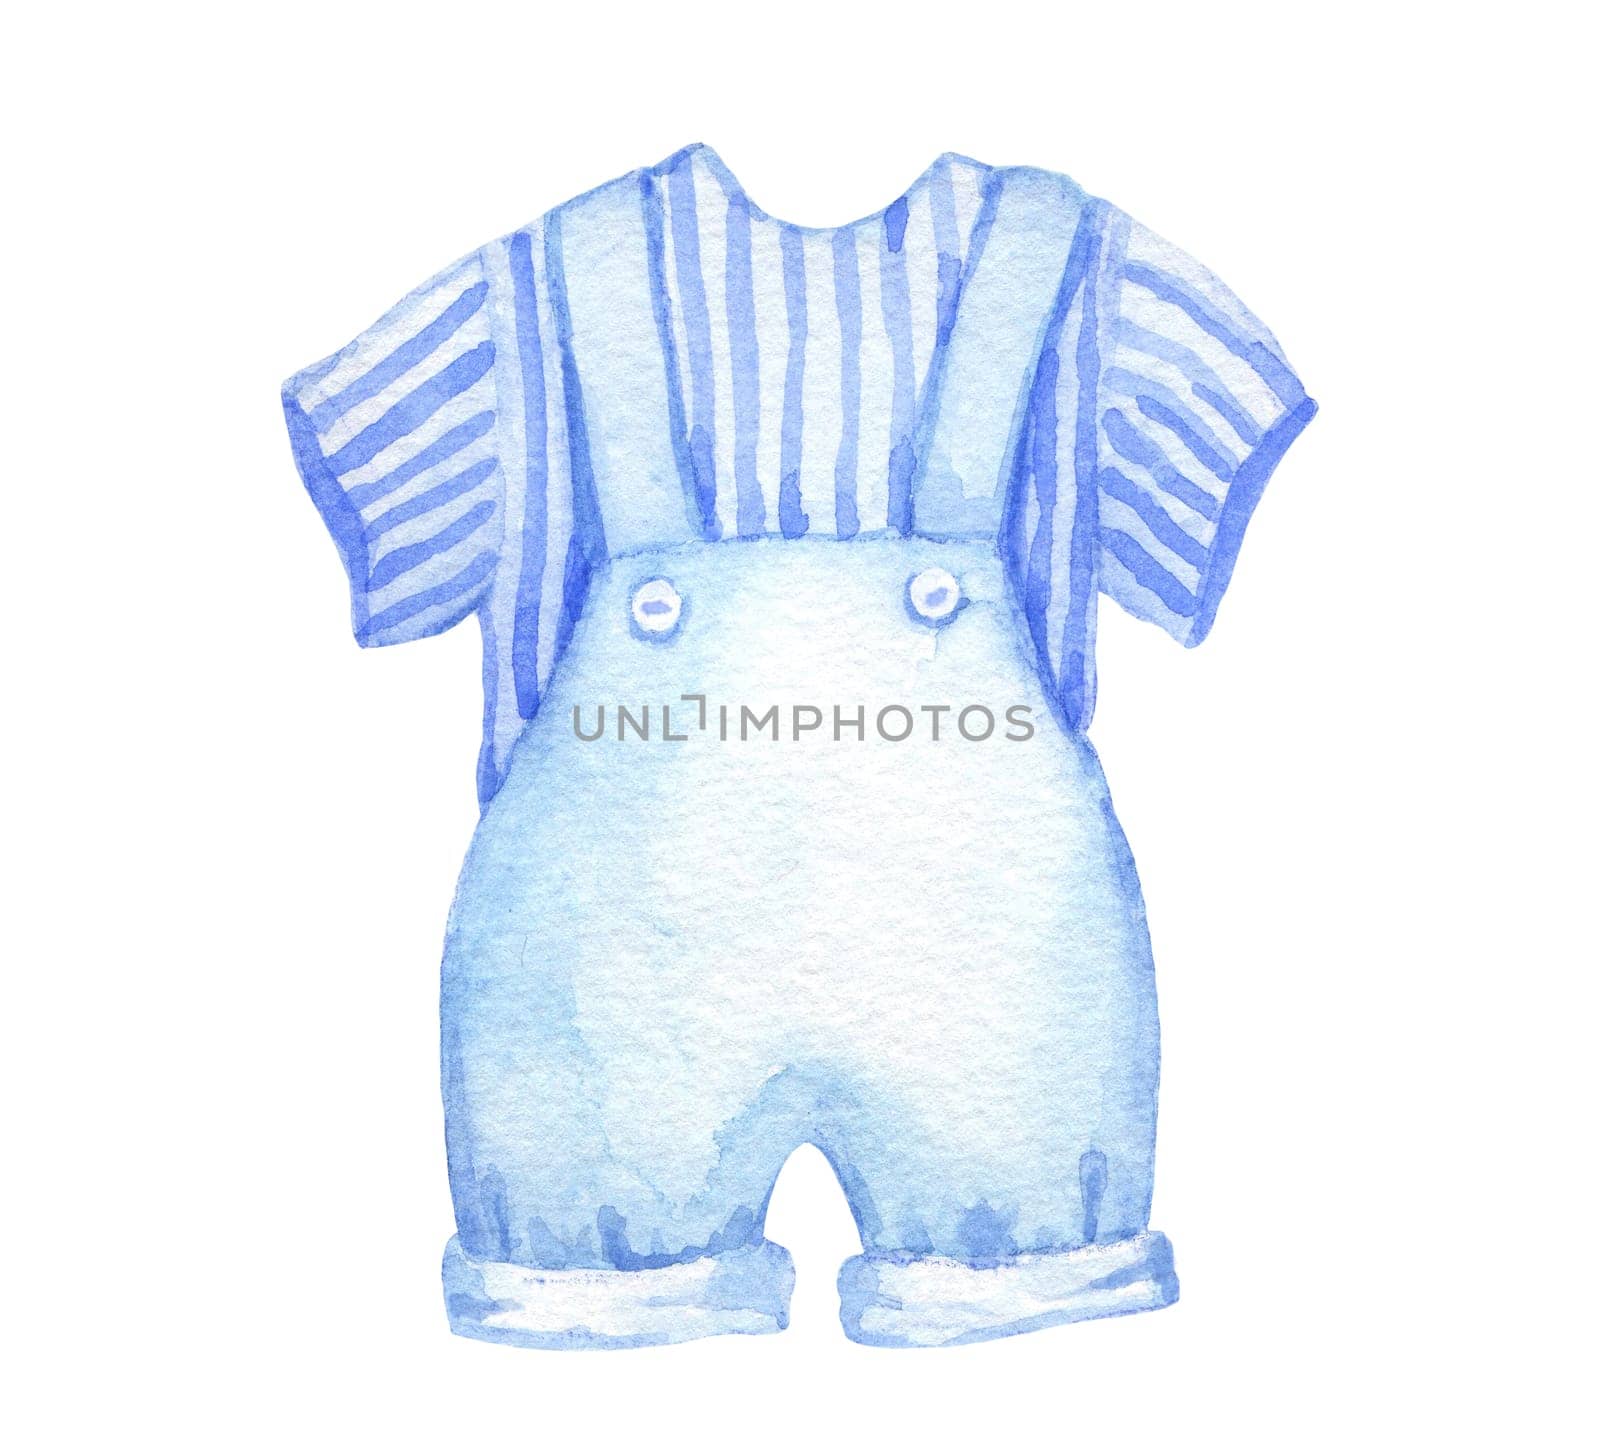 Infant blue pants and striped t-shirt illustration. Watercolor sketch Baby clothes isolated on white